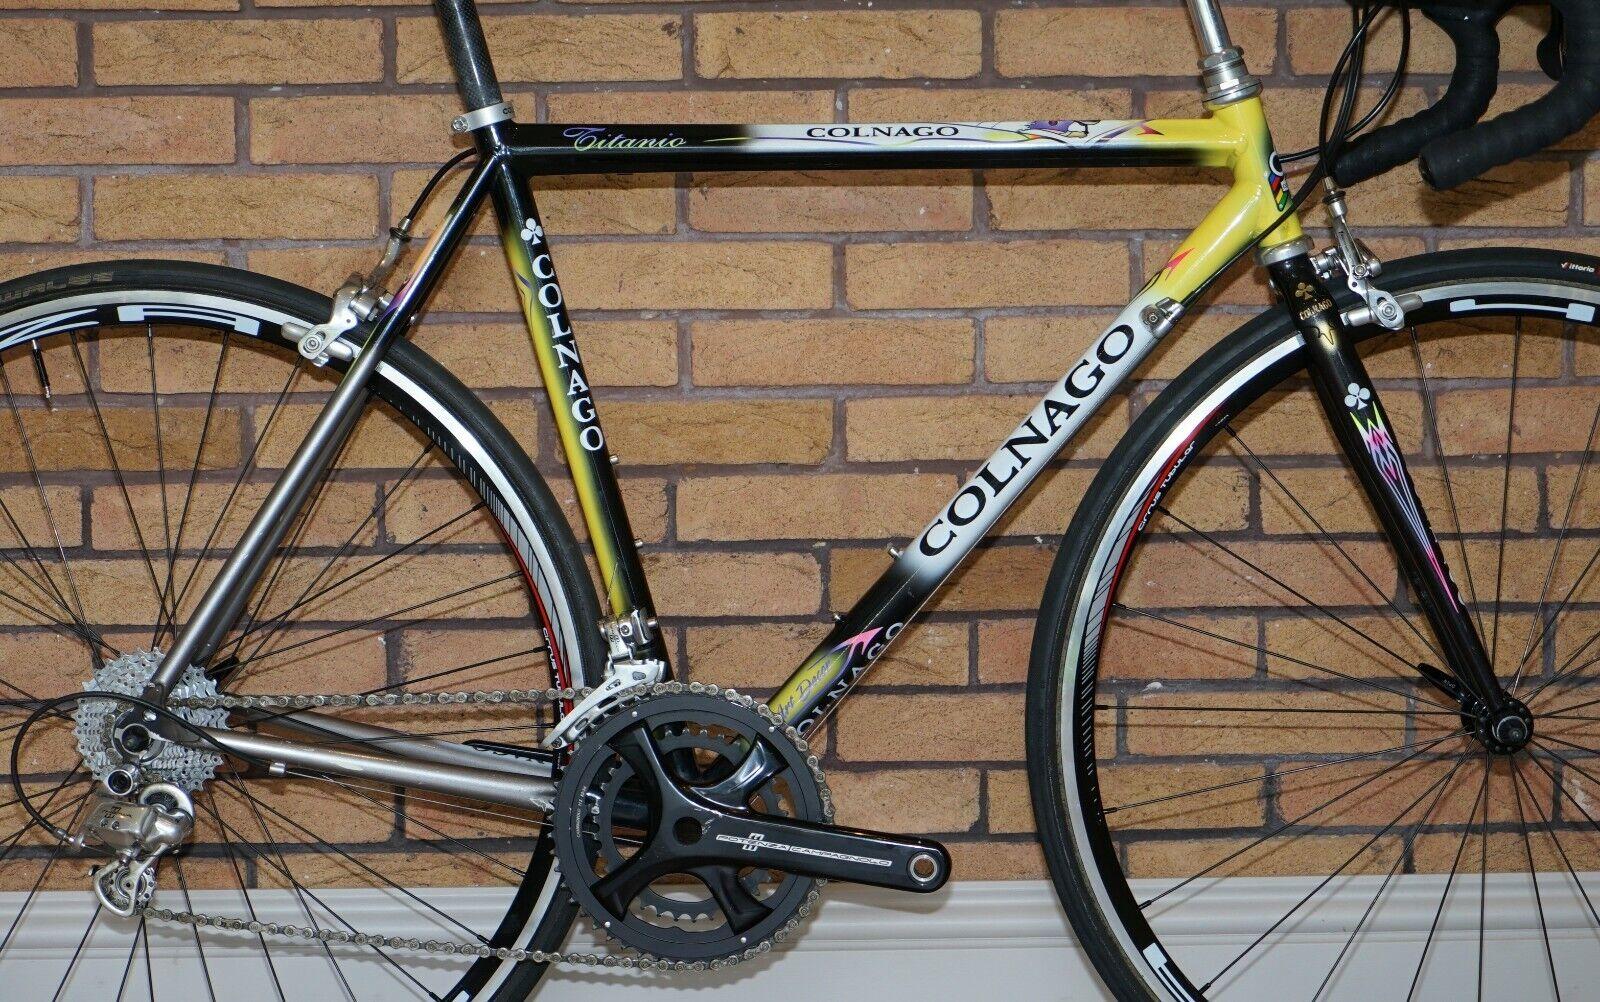 Royal House Antiques is delighted to offer for sale this super rare Colnago Titanio road bike with titanium alloy frameset, original matching Colnago Precisa steel forks, all finished with the Art Décor paint scheme

HISTORY

I am selling my